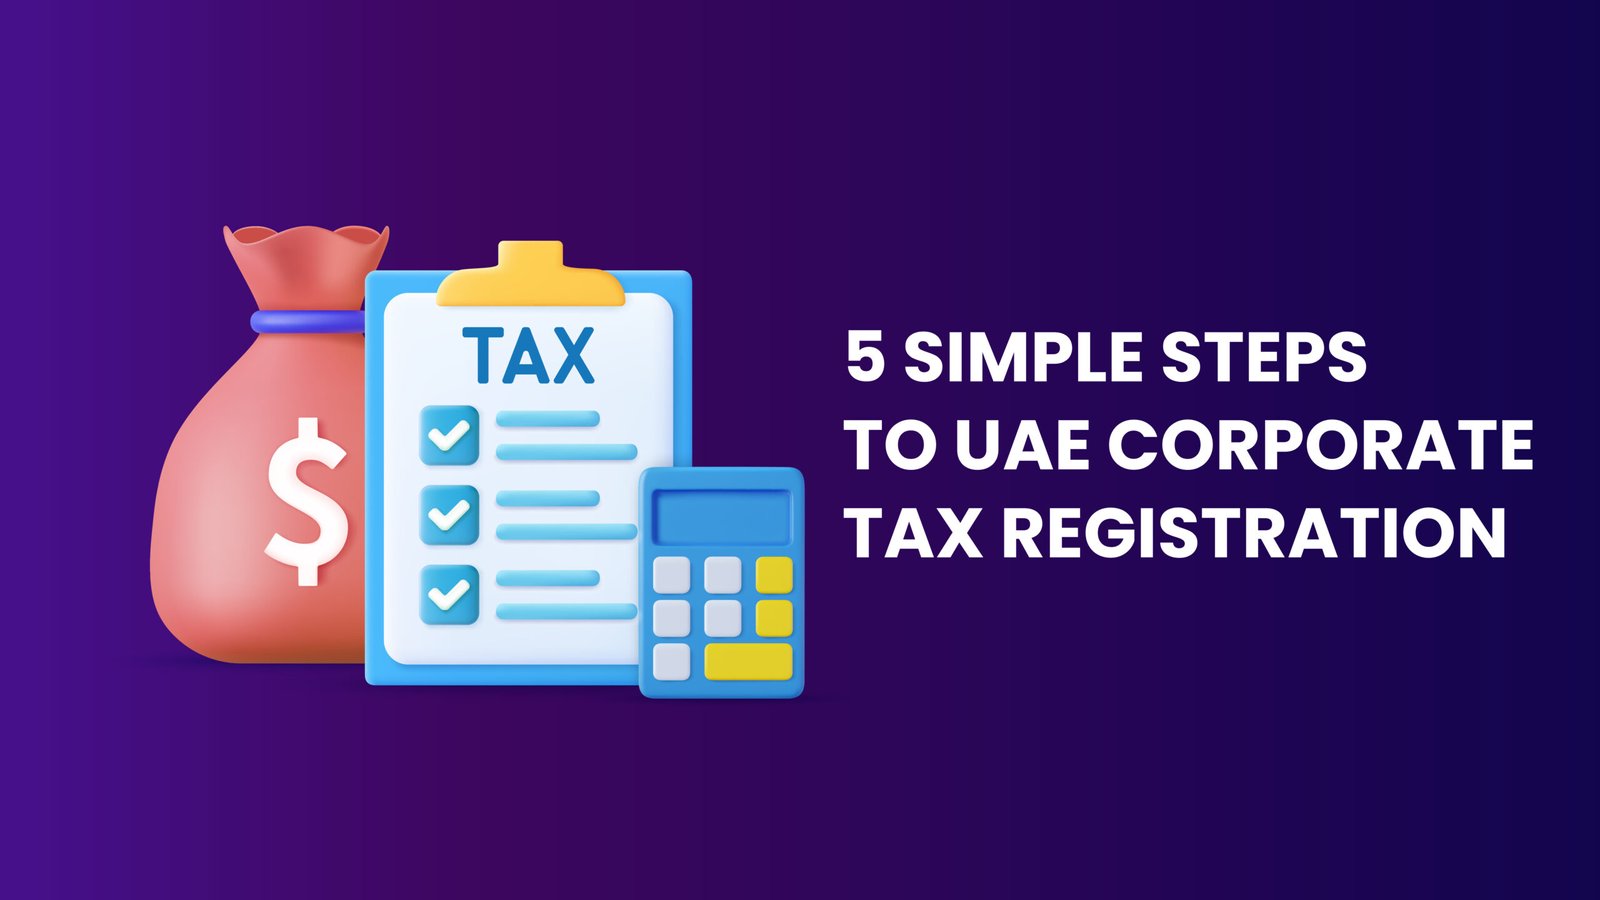 Steps To UAE Corporate Tax Registration